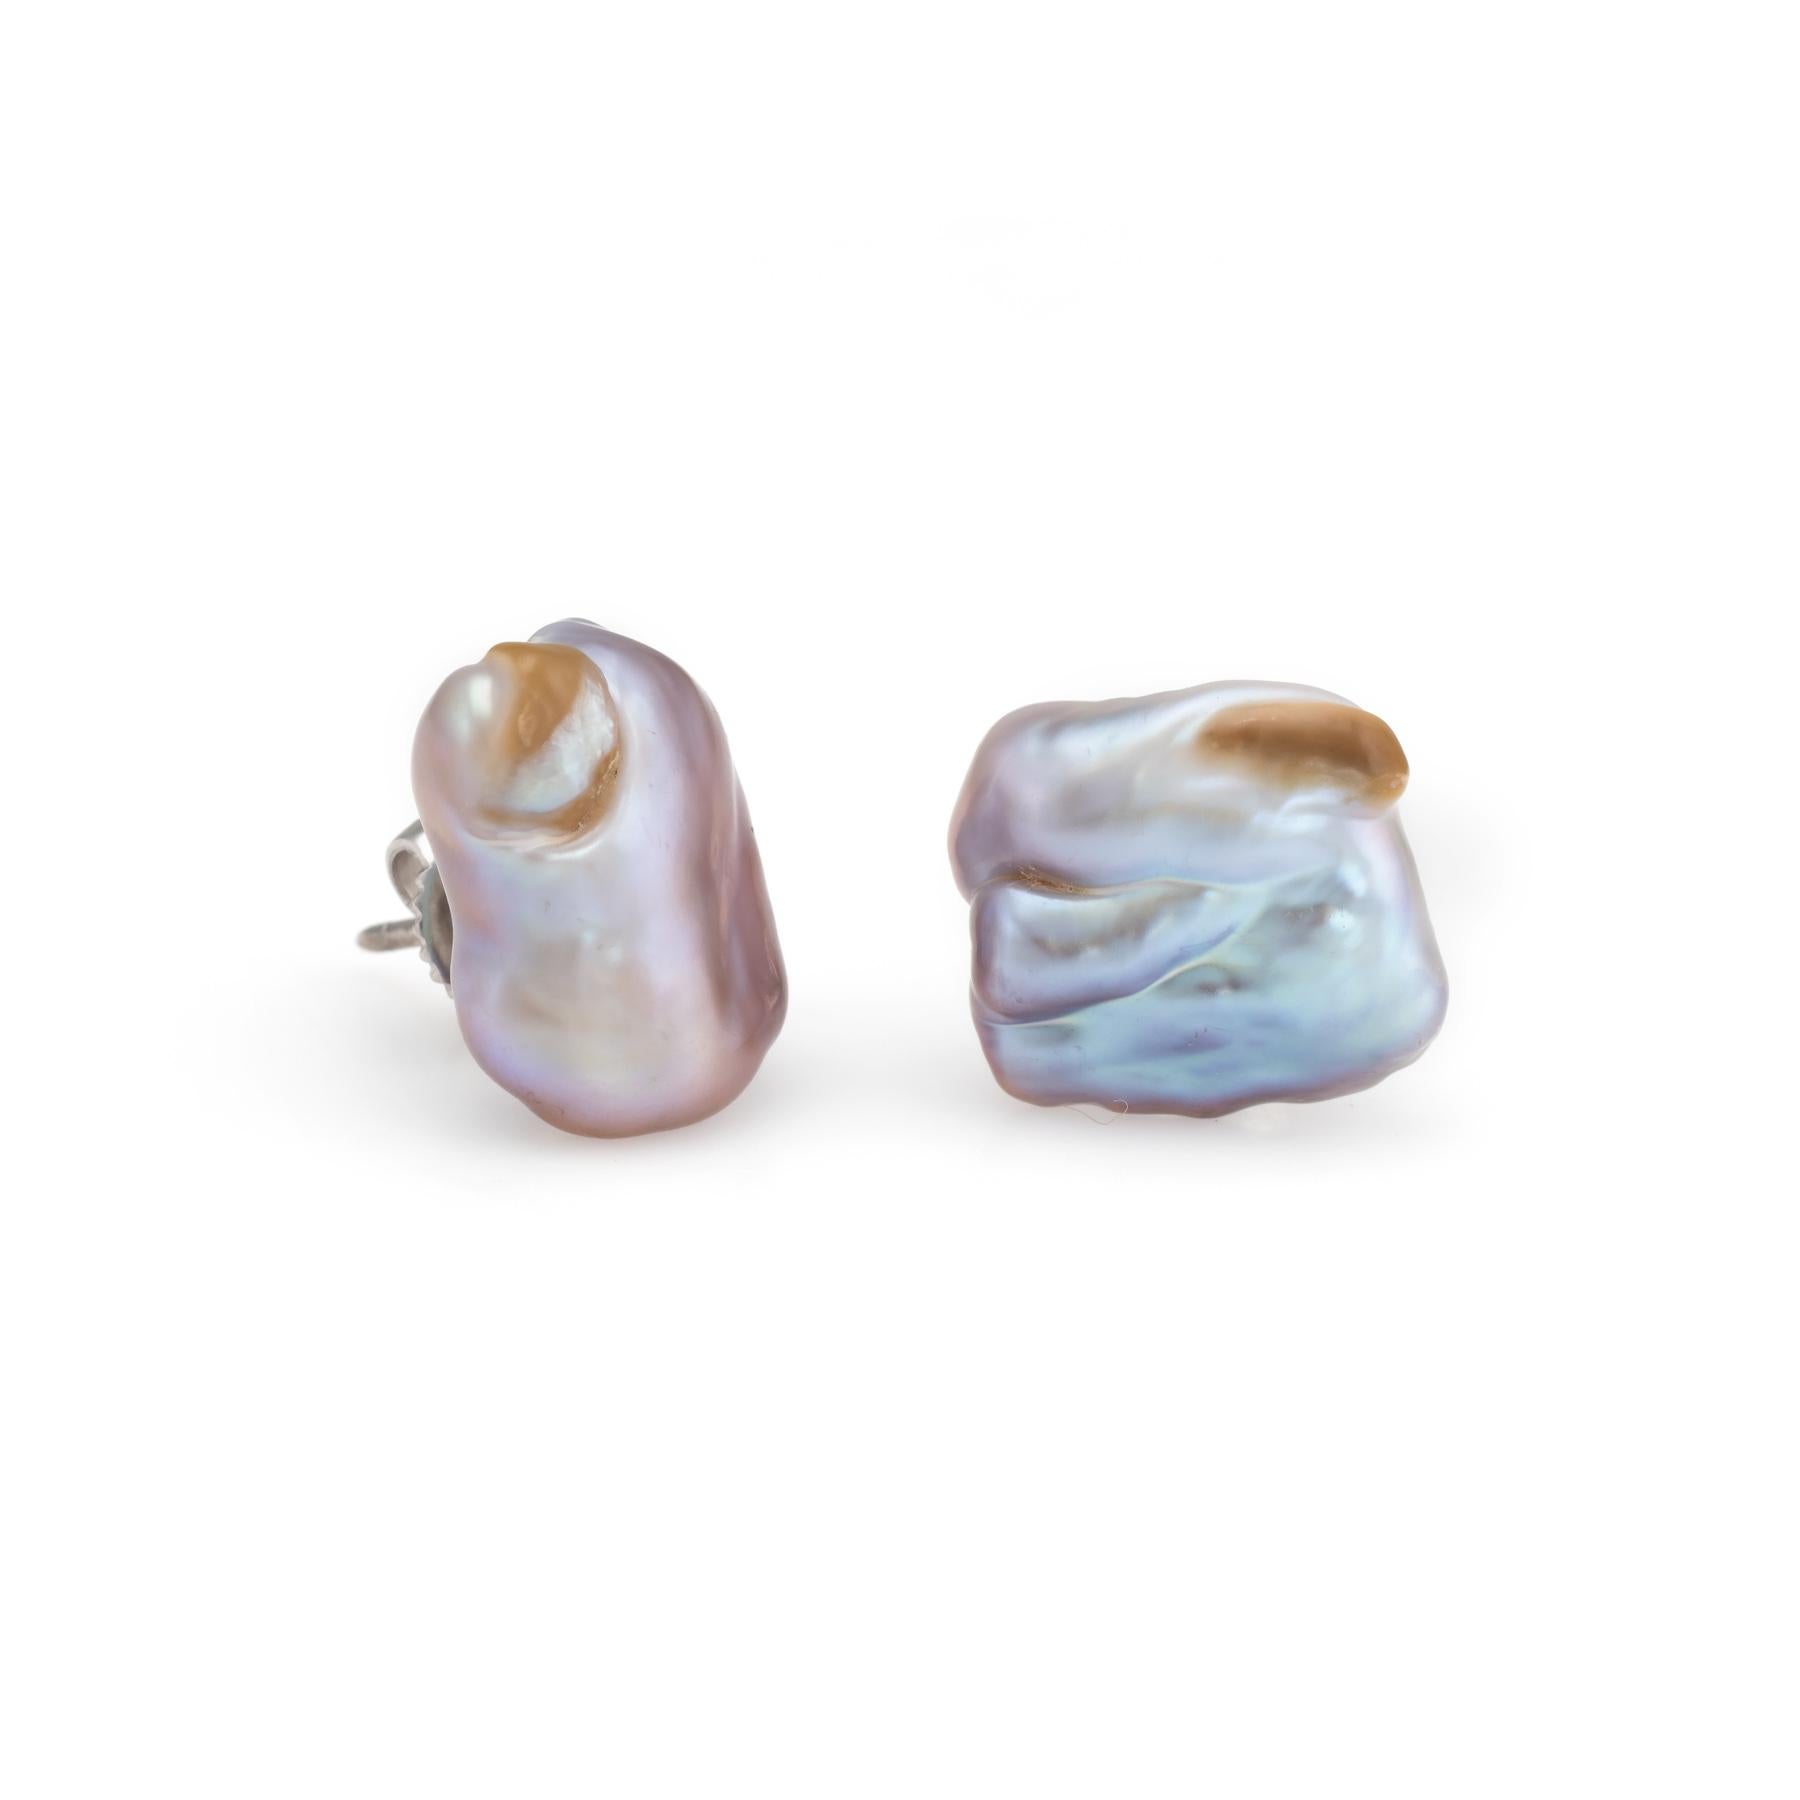 Elegant pair of vintage baroque pearl earrings finished with 14k white gold backings. 

The baroque pearls measure 13mm x 12mm and 15mm x 11mm. The pearls are a soft grey to pinkish color.  

The irregular non-spherical shapes of the pearls add a